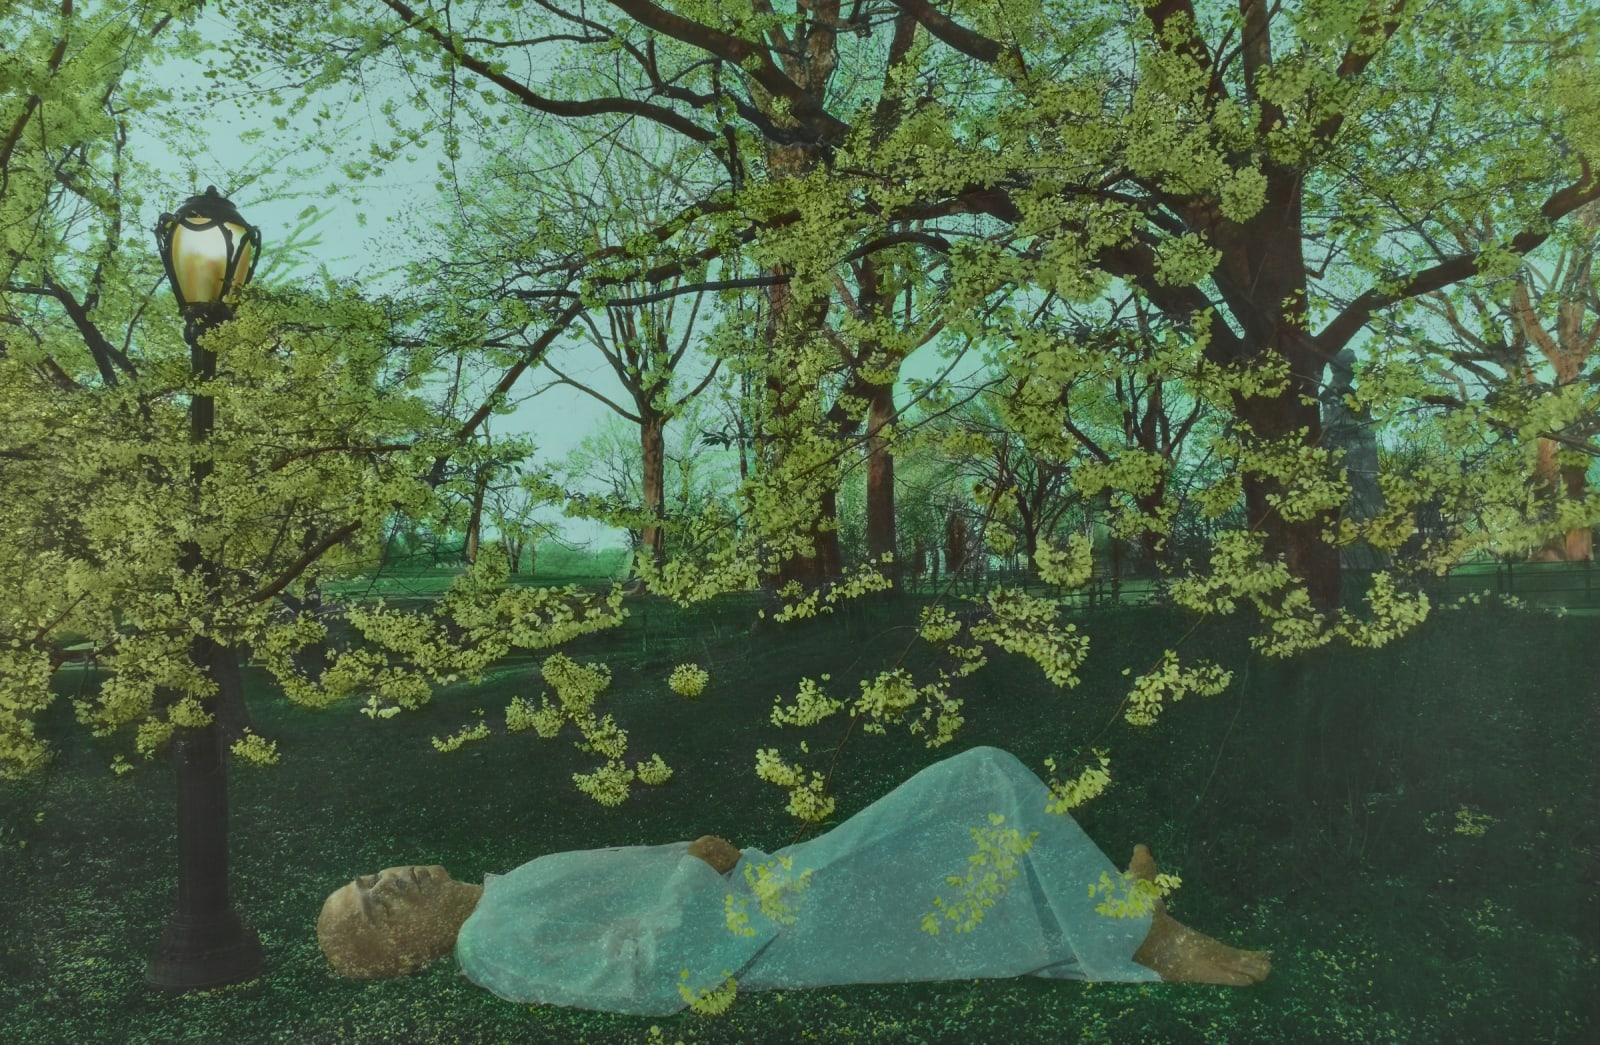 Self-portrait in the Park, New York 2021, 2021 Hand colored gelatin silverprint 74,5 x 100,5 x 3,5 cm Variation of 5